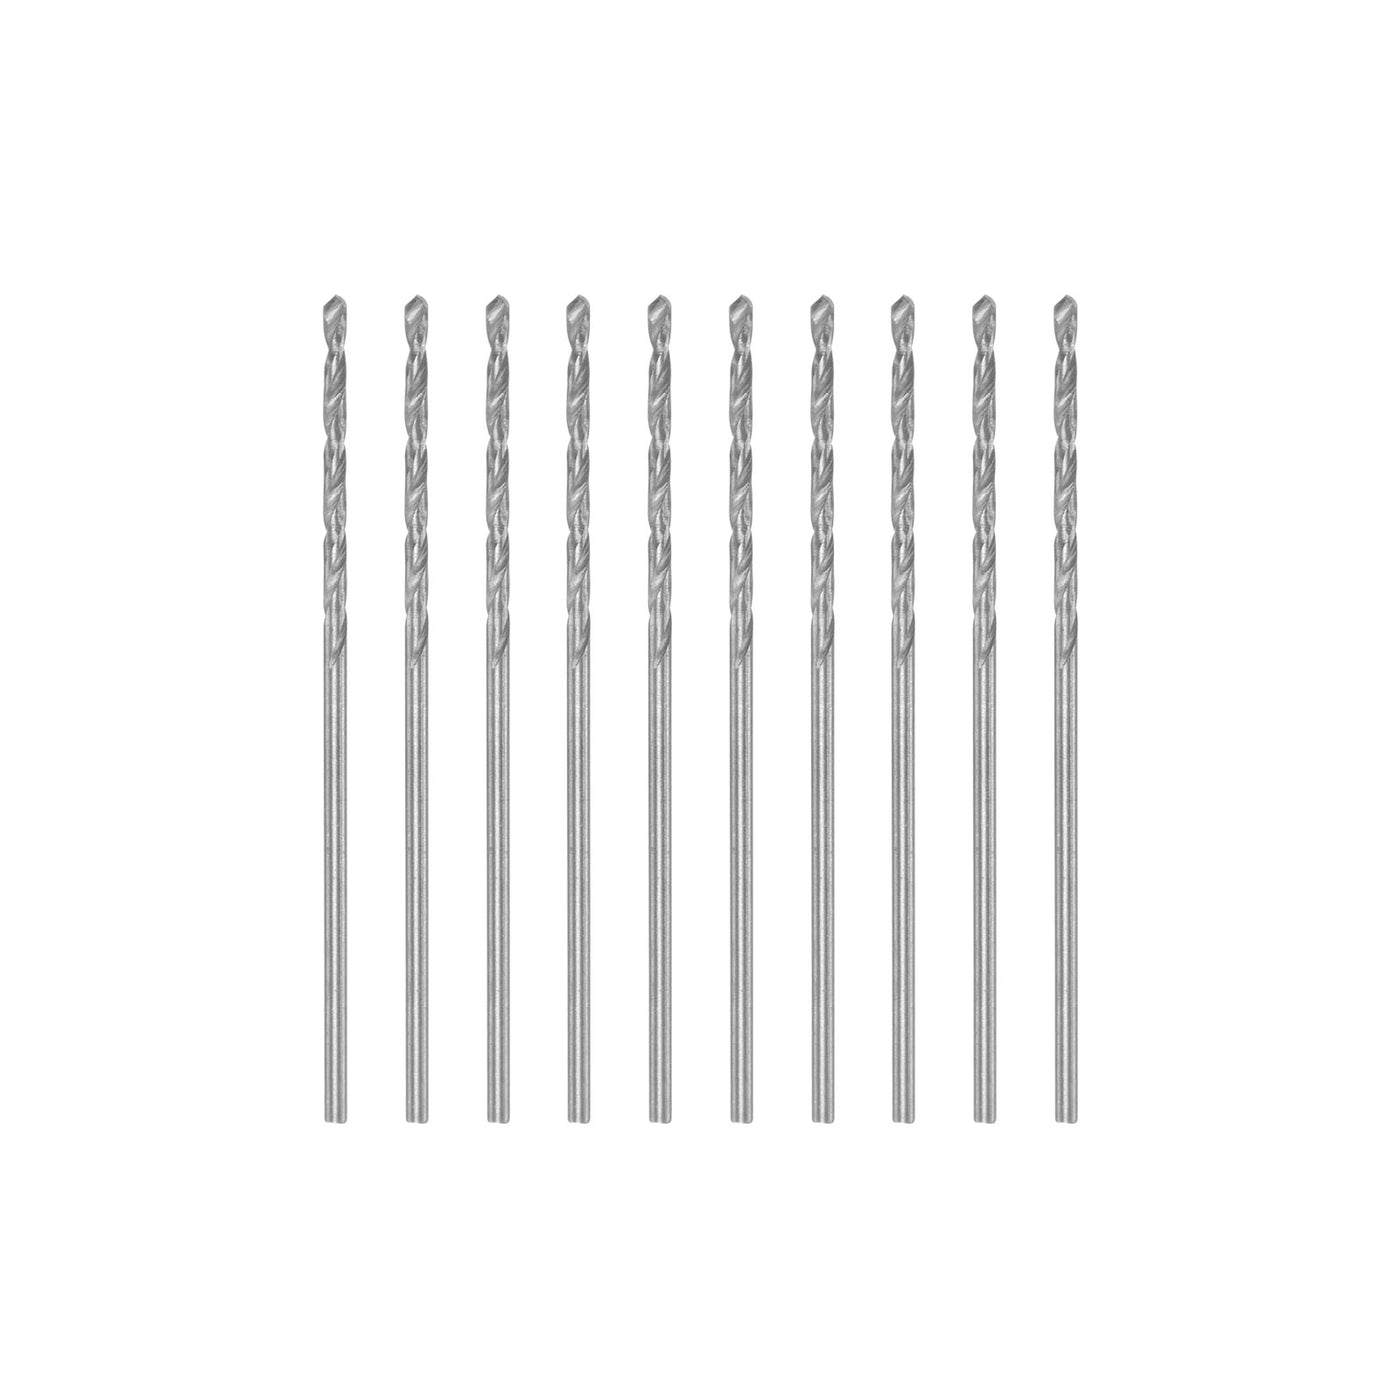 uxcell Uxcell 10 Pcs 1.1mm High Speed Steel Drill Bits, Fully Ground 36mm Length Drill Bit